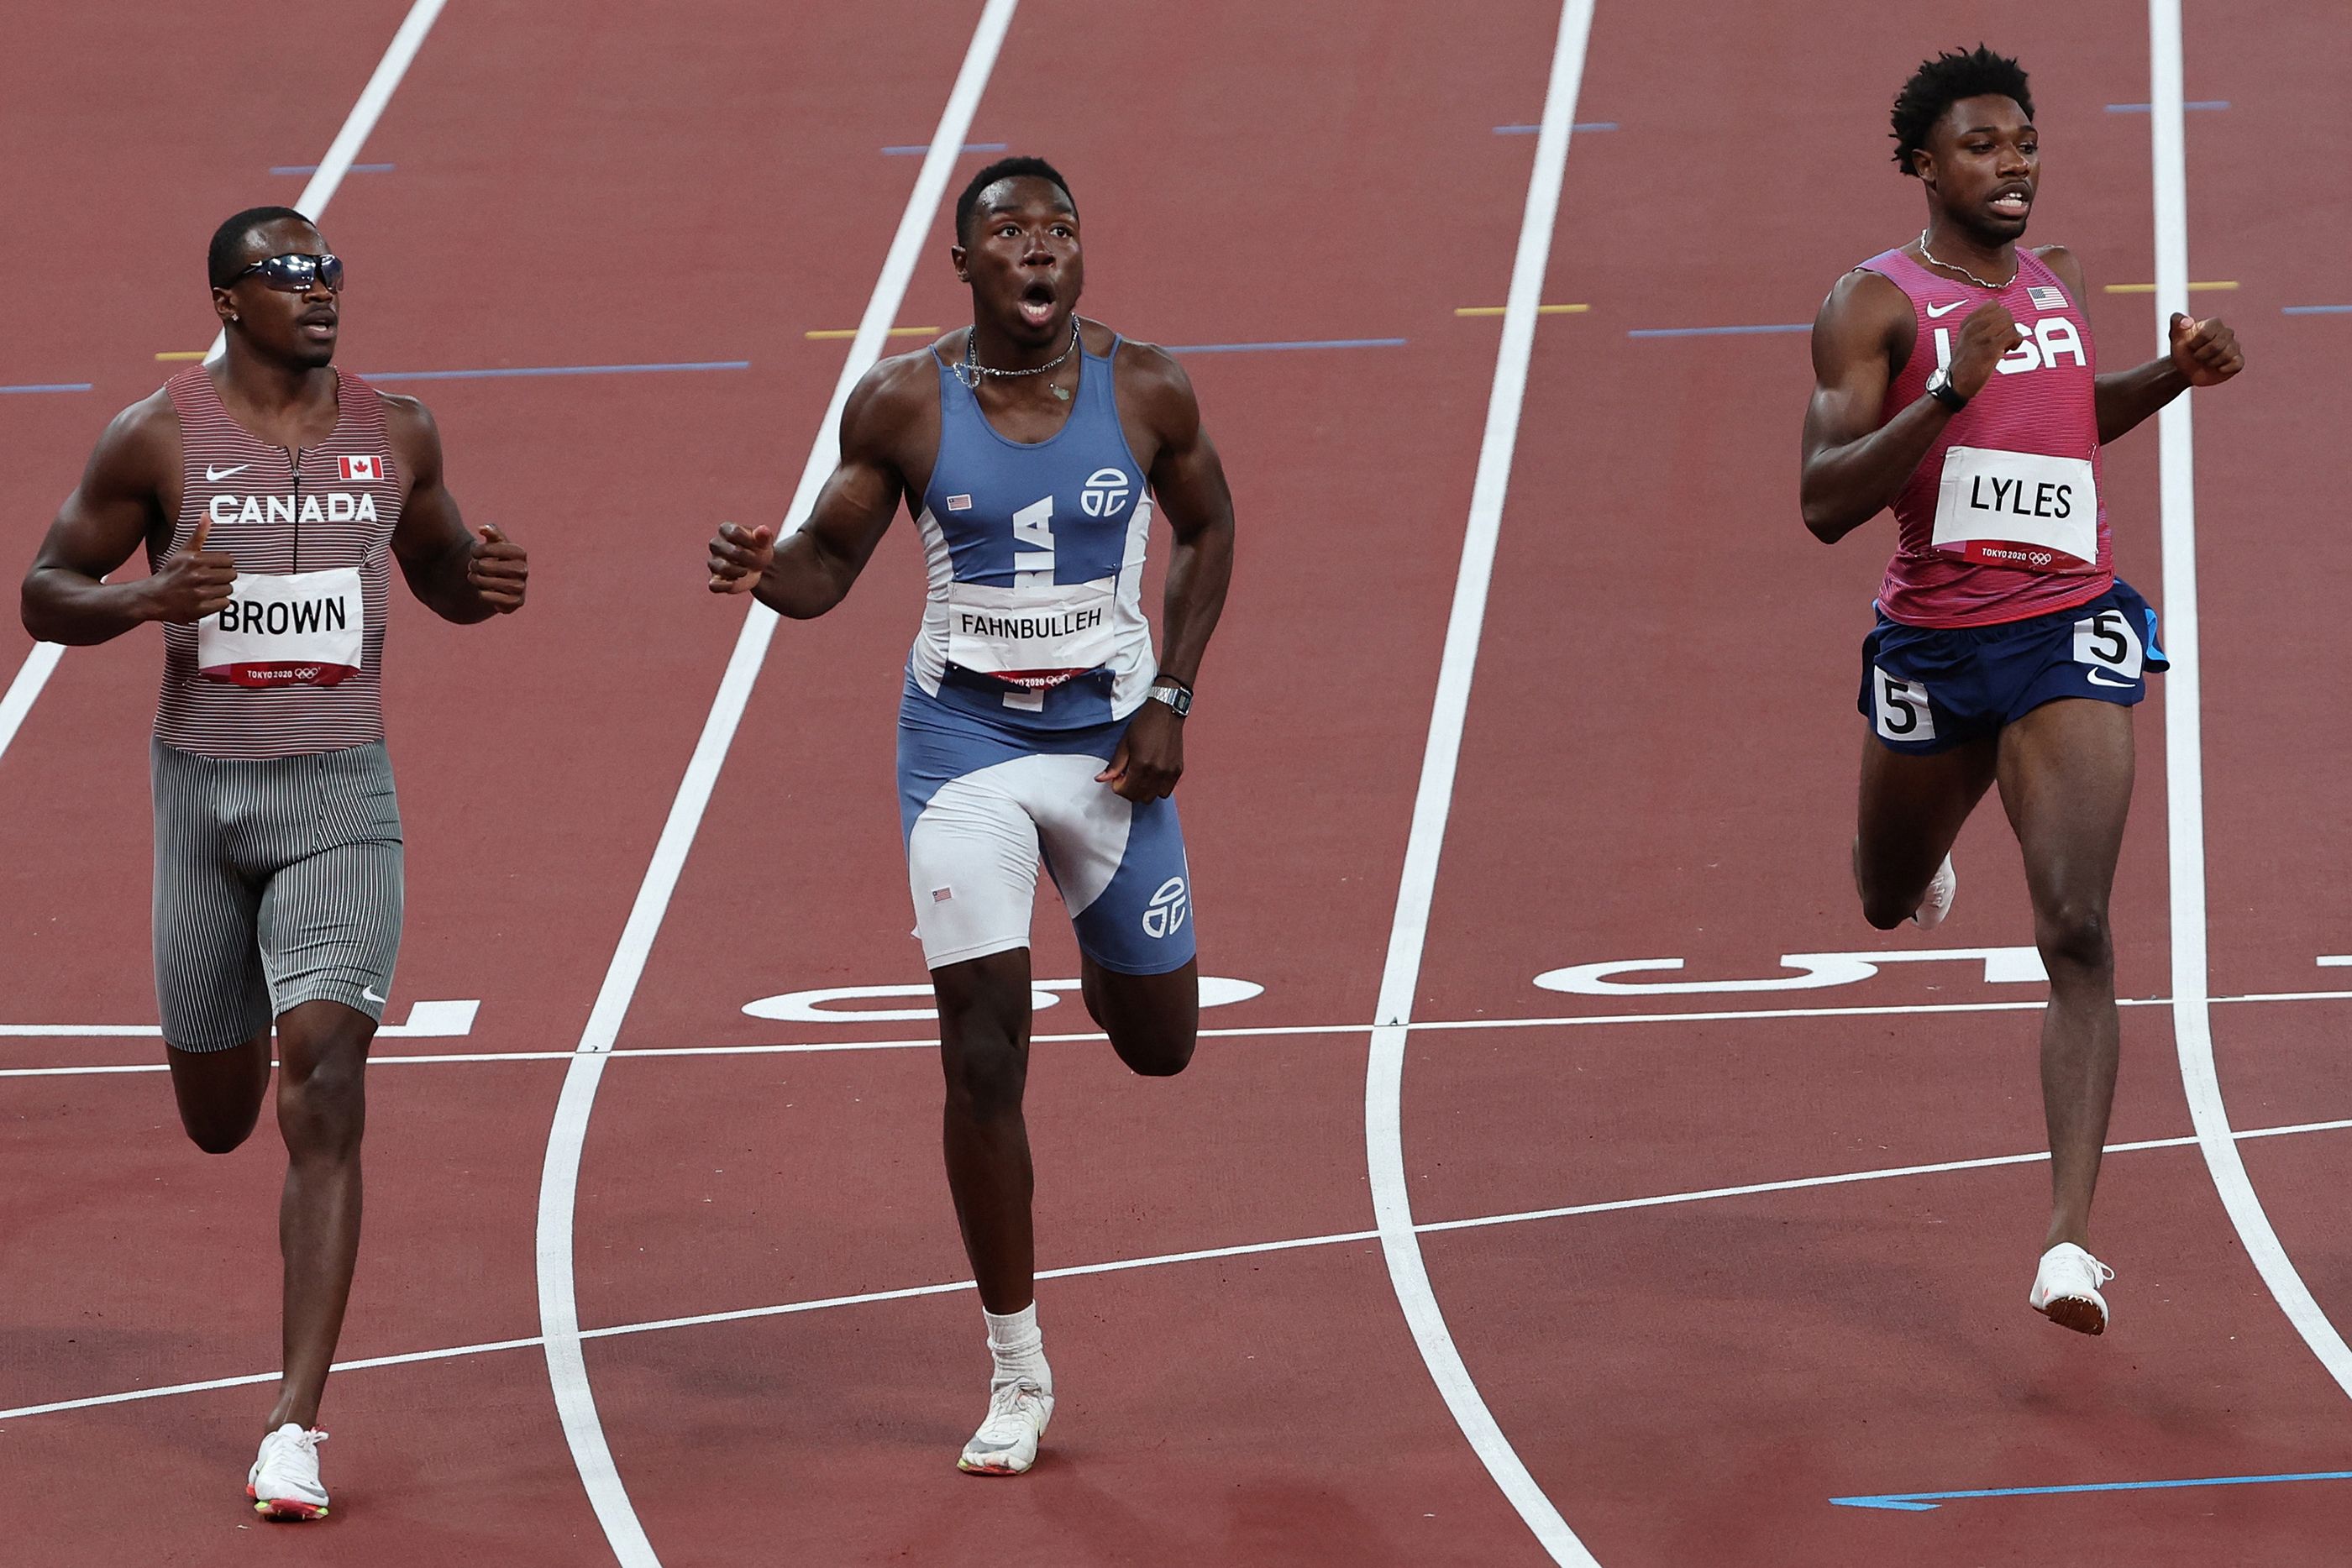 Joseph Fahnbulleh competes in the 200m semifinals at the Olympic Games in Tokyo